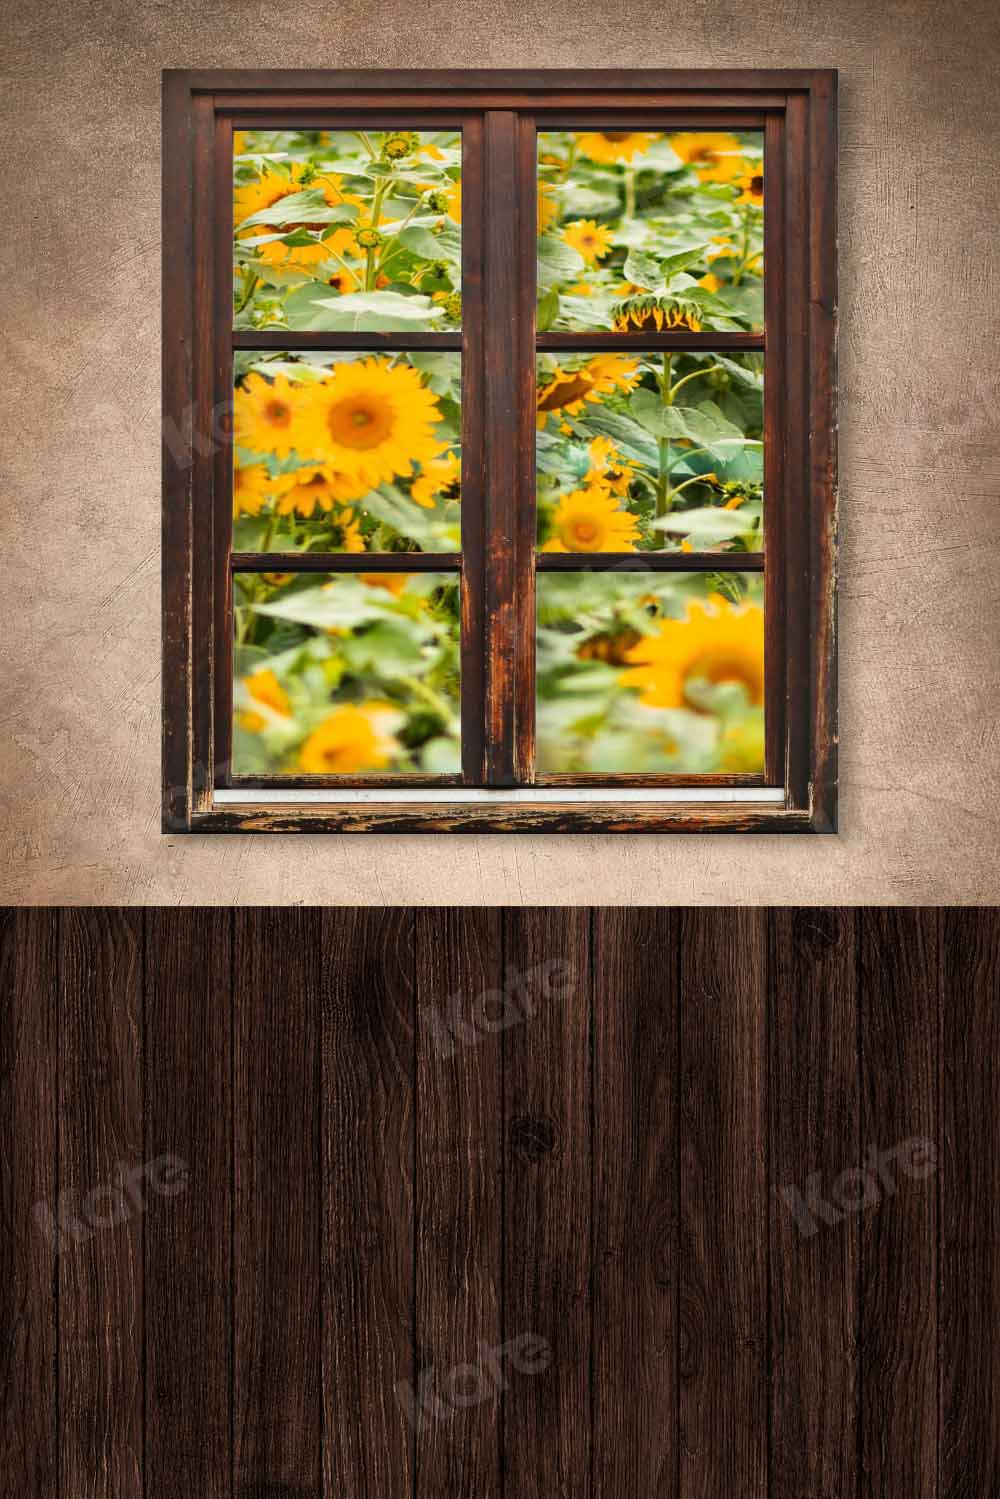 Kate Abstract Wood Board Backdrop Sunflower Splicing Designed by Chain Photography